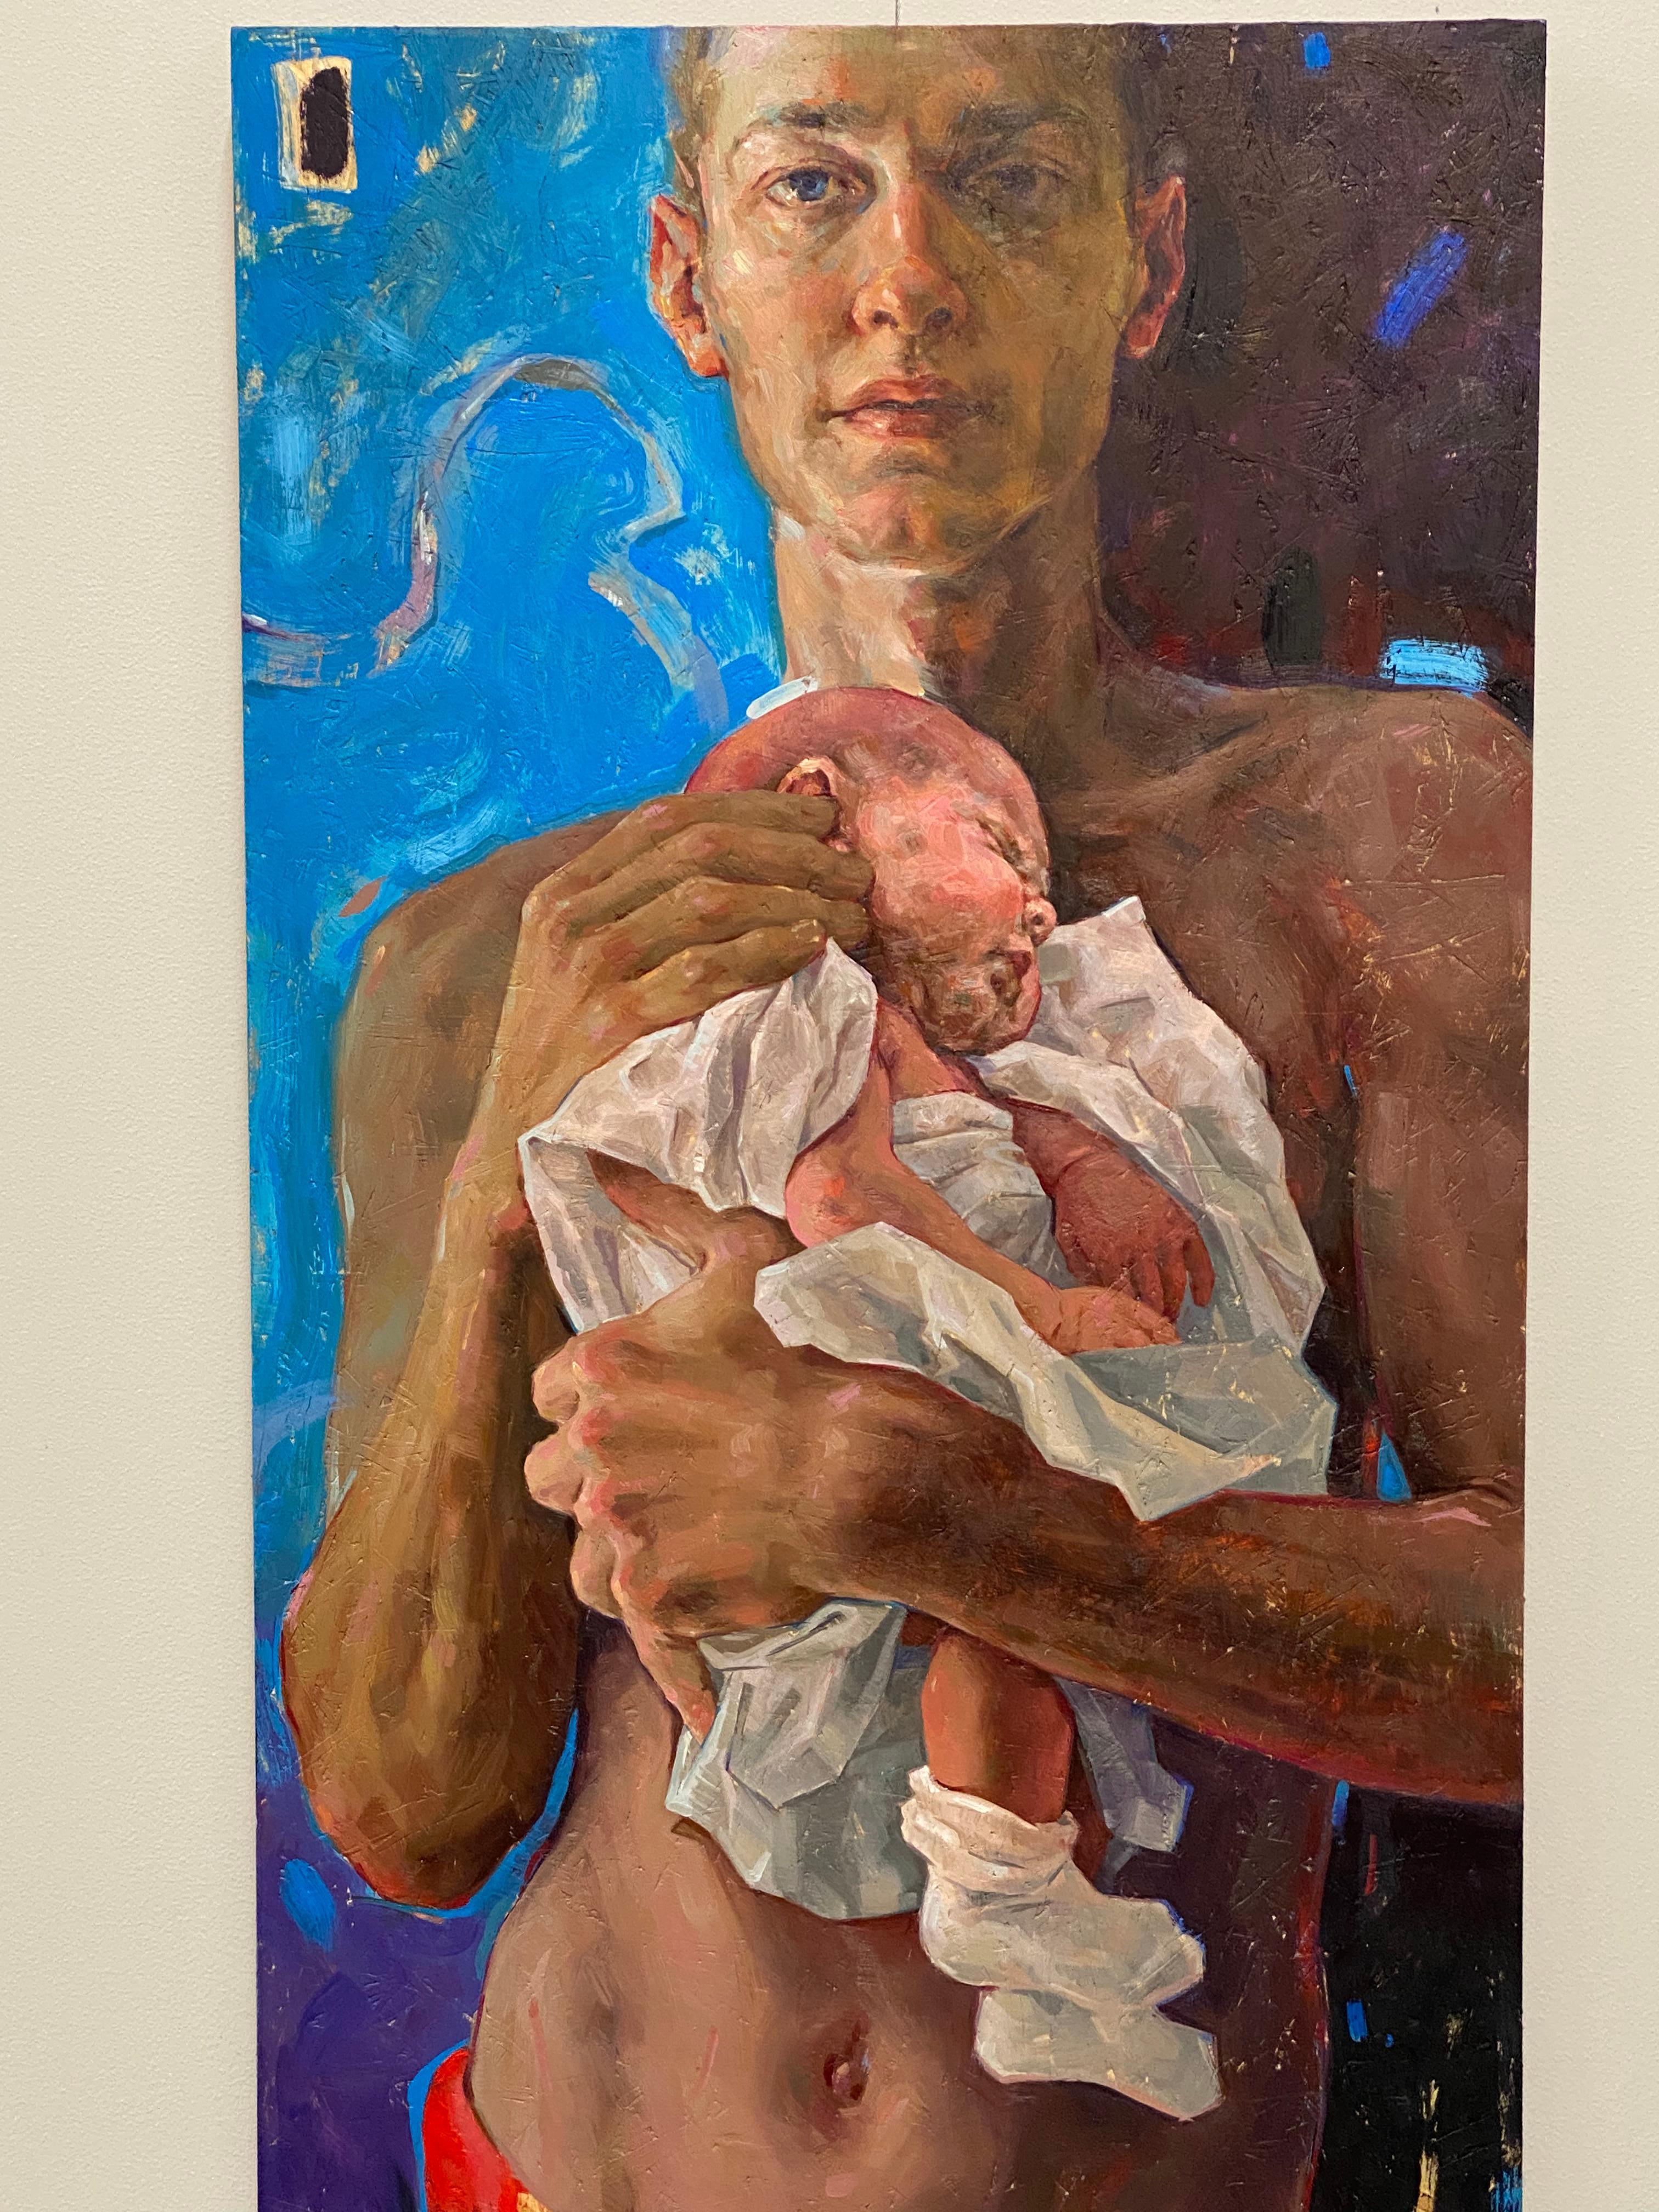 Reflection came 21st- century Contemporary Paintings of a young man and his baby 2